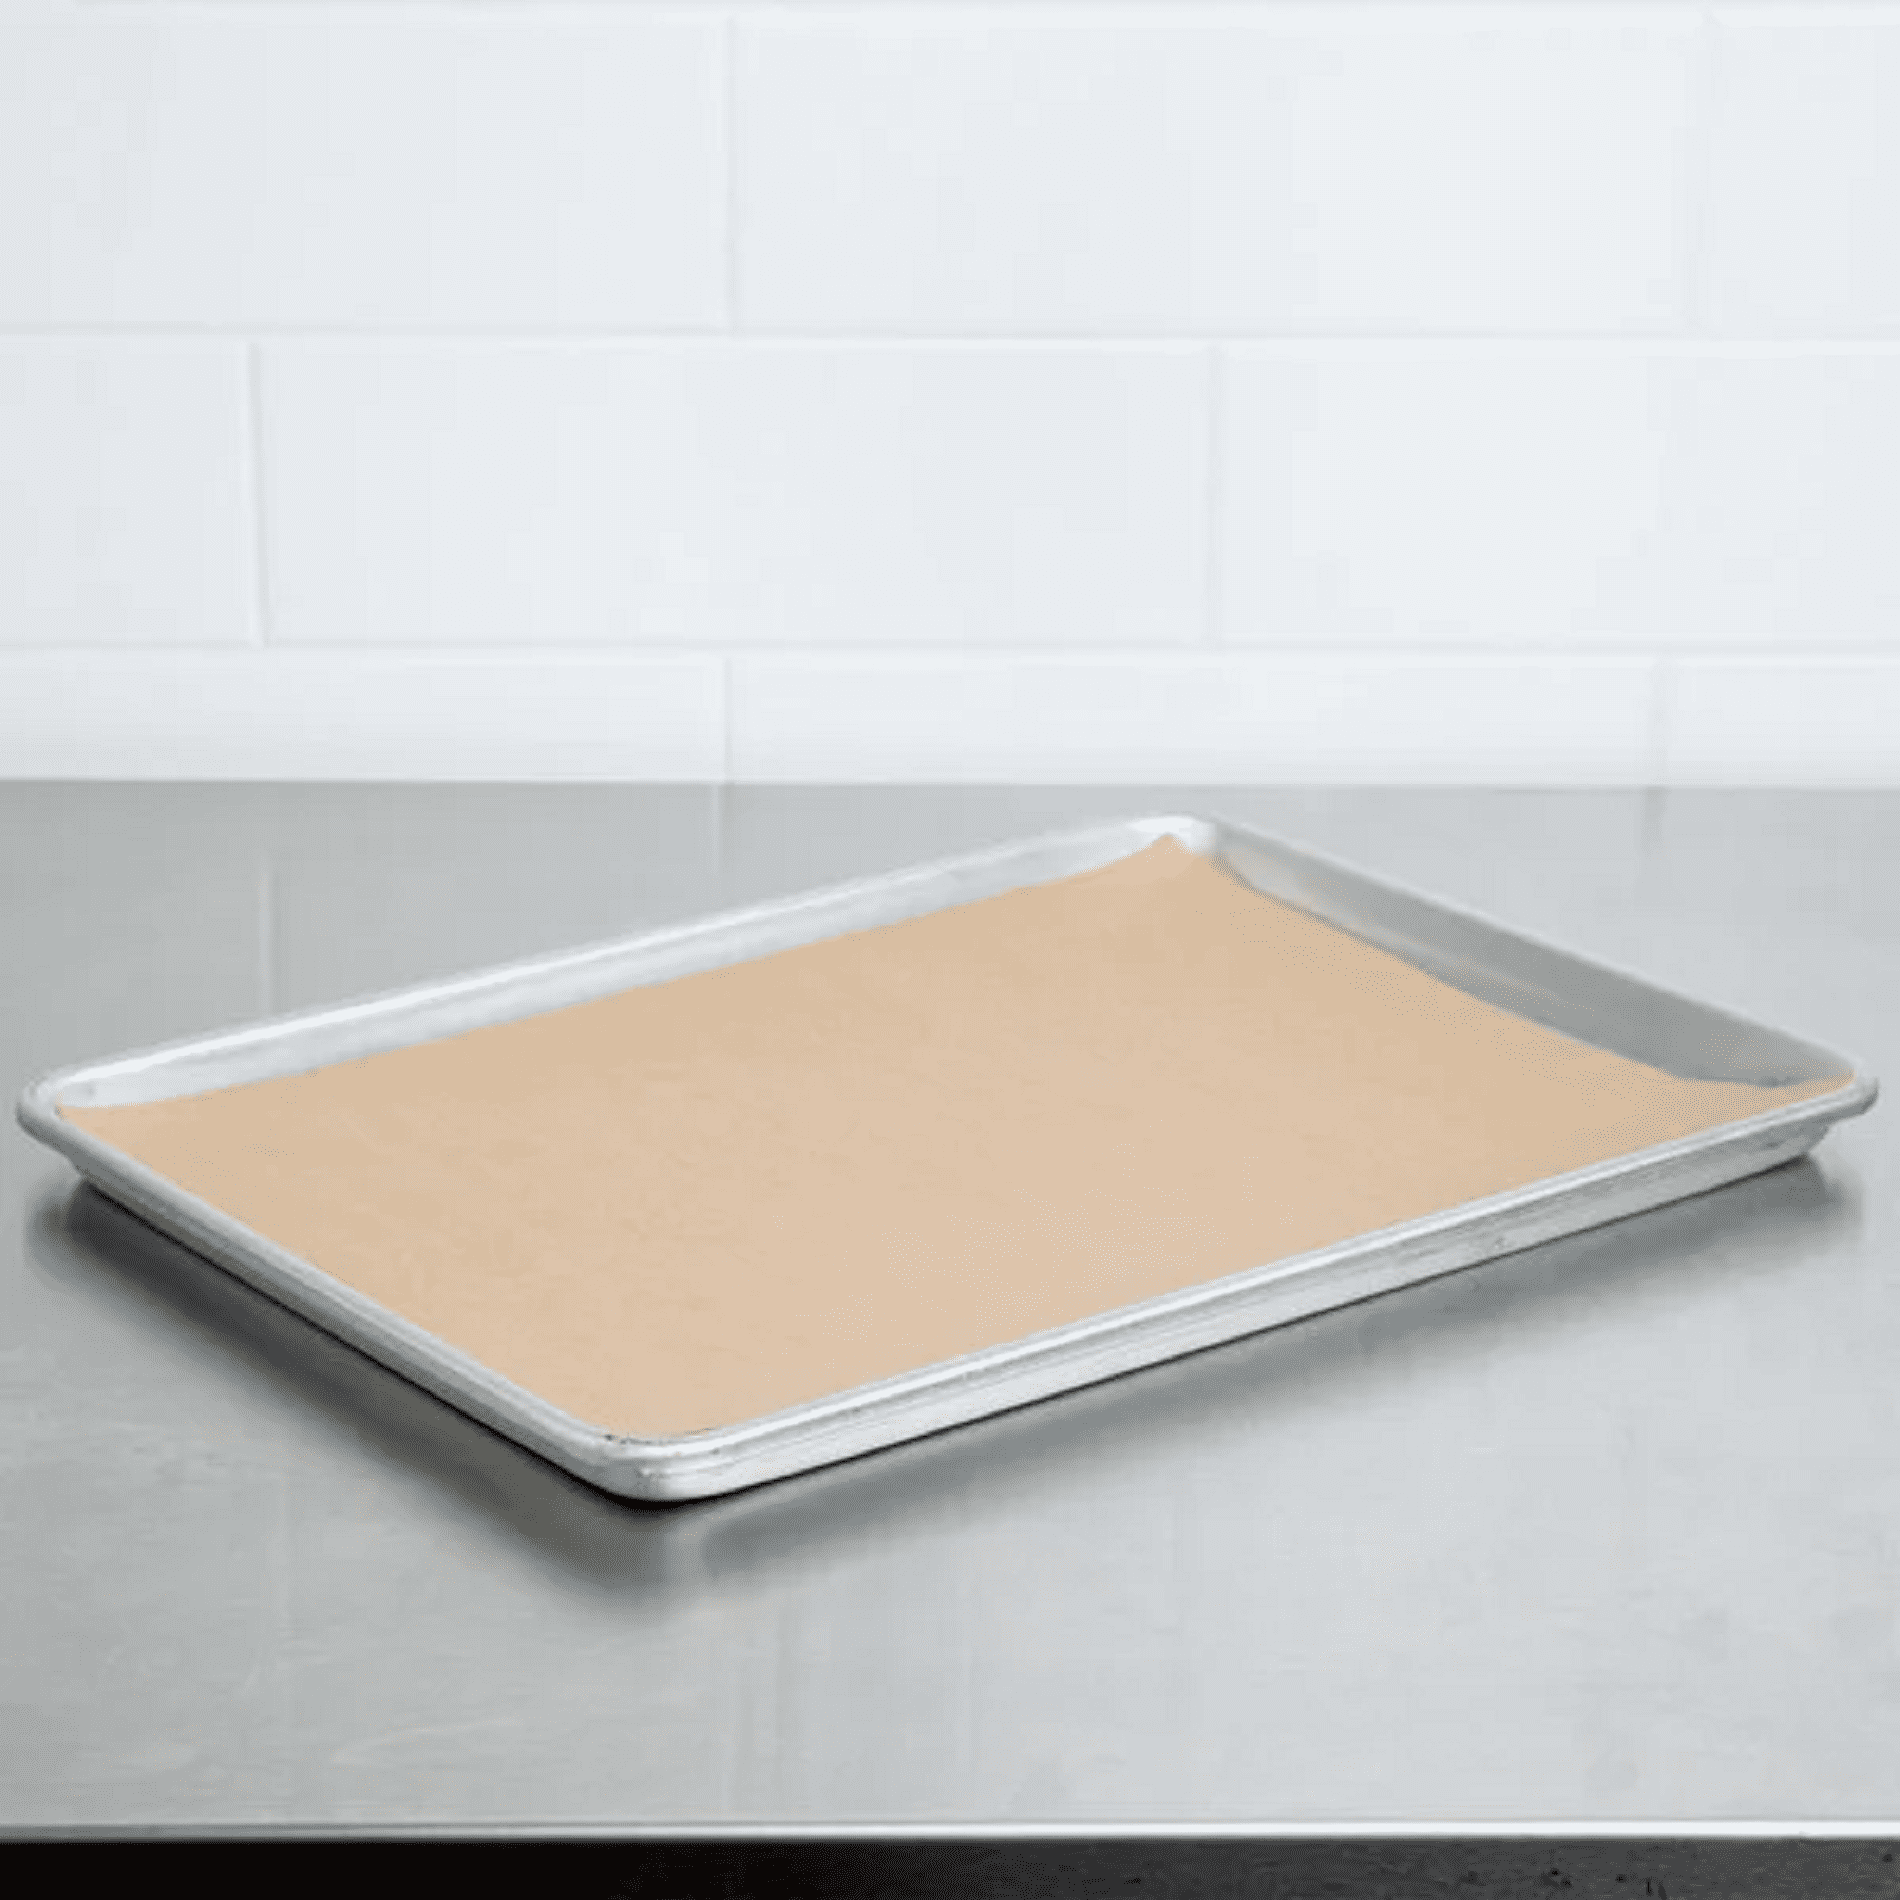 5x5 Inches 300 Sheets Parchment Paper Squares by Baker?s Signature   Silicone Coated & Unbleached - Ideal for Baking, Wrapping, Freezing &  Diamond Painting - Non-Toxic & Comes in Conven 